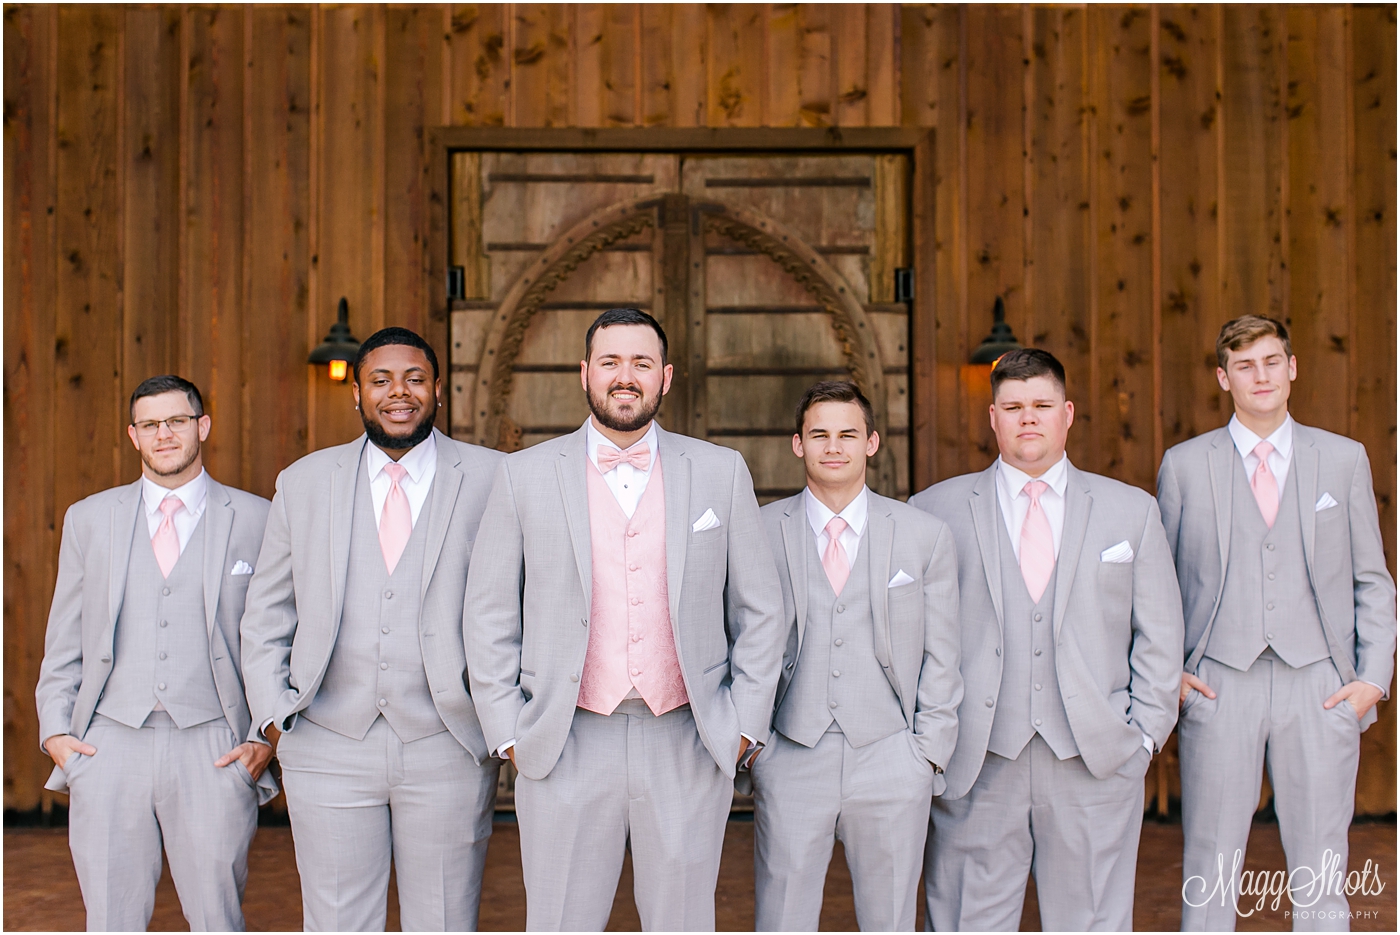 MaggShots Photography, DFW Wedding Photographer, Lucky Spur Wedding Photographer, Lucky Spur, Wedding Photographer, Justin wedding, Lucky Spur Wedding, wedding party, grooms party, boutonniere, wooden doors, 